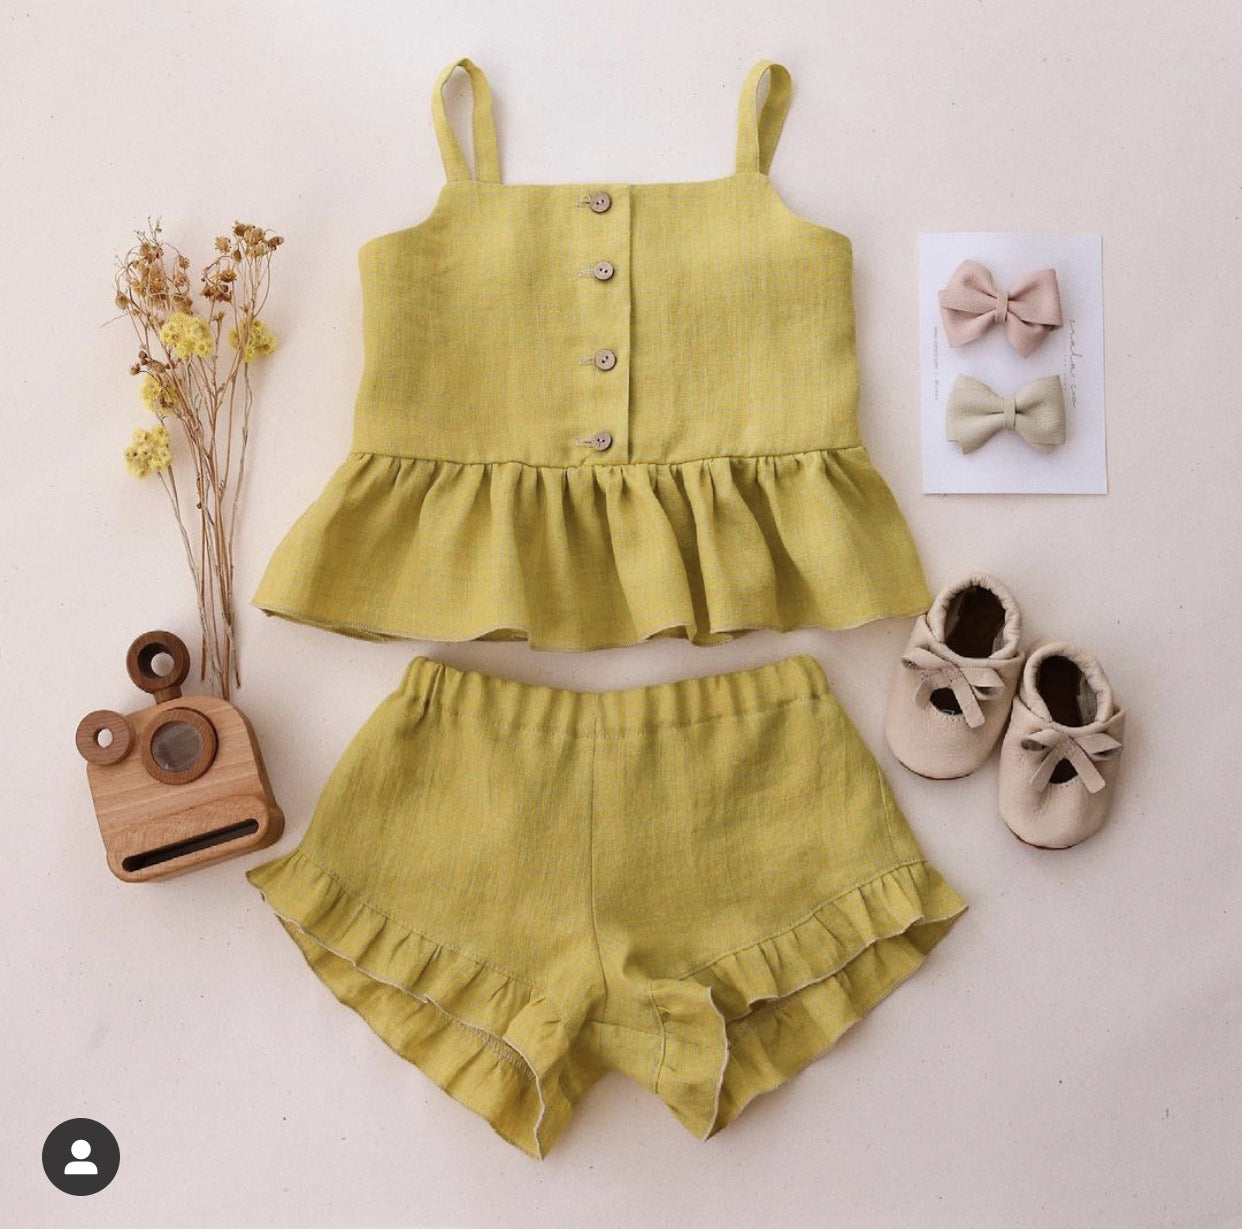 Ma Female Baby Suit Summer Sling Top Four-corner Ruffled Shorts Girls Two-piece Infant Clothing